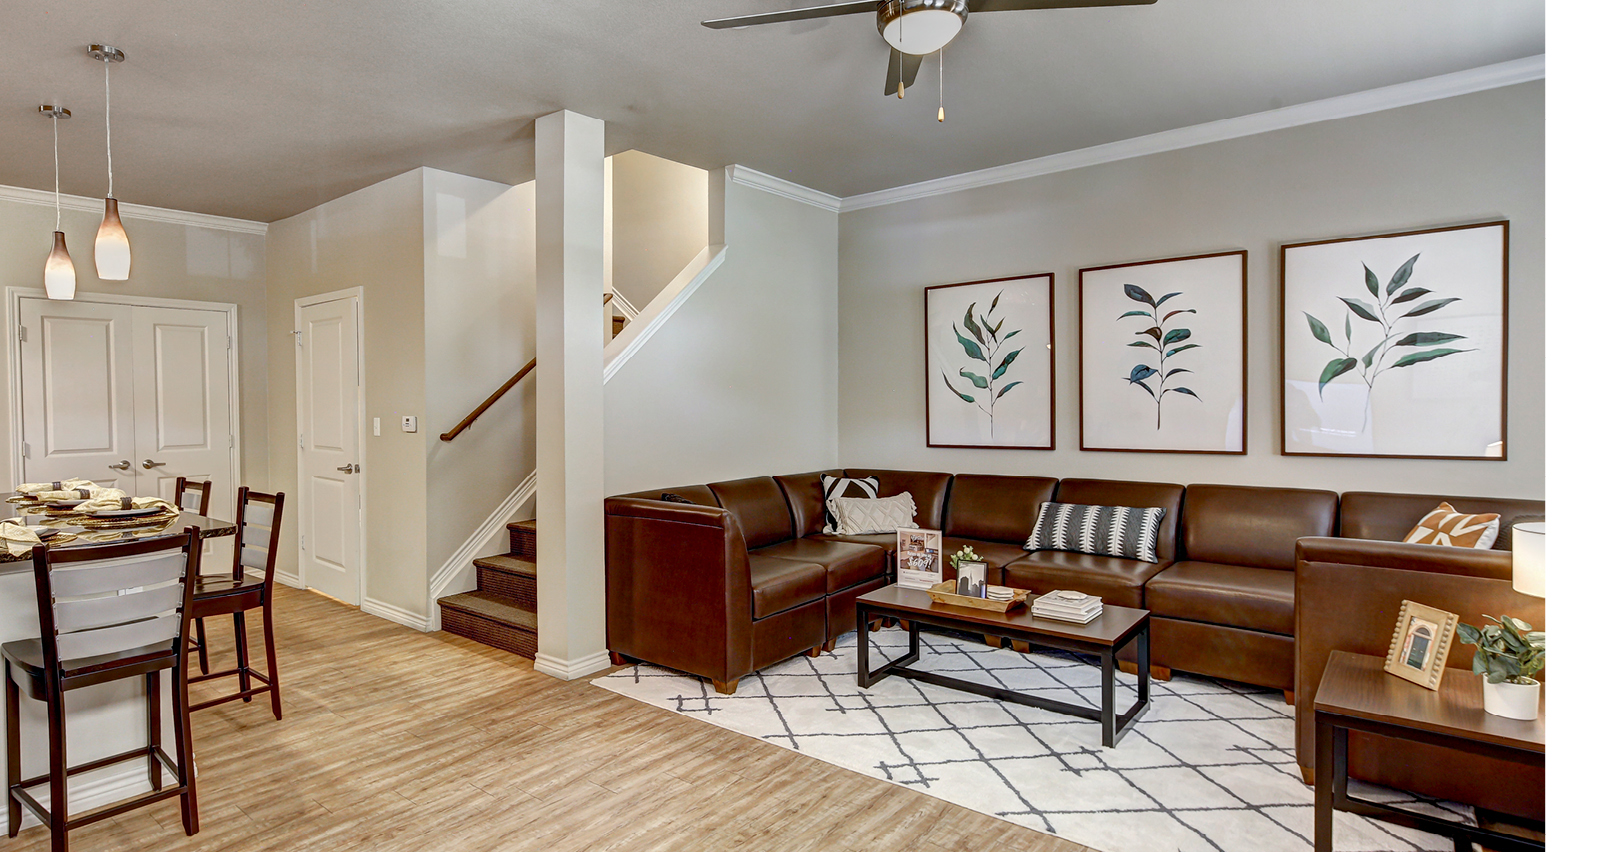 U Club Townhomes at Overton Park image 2